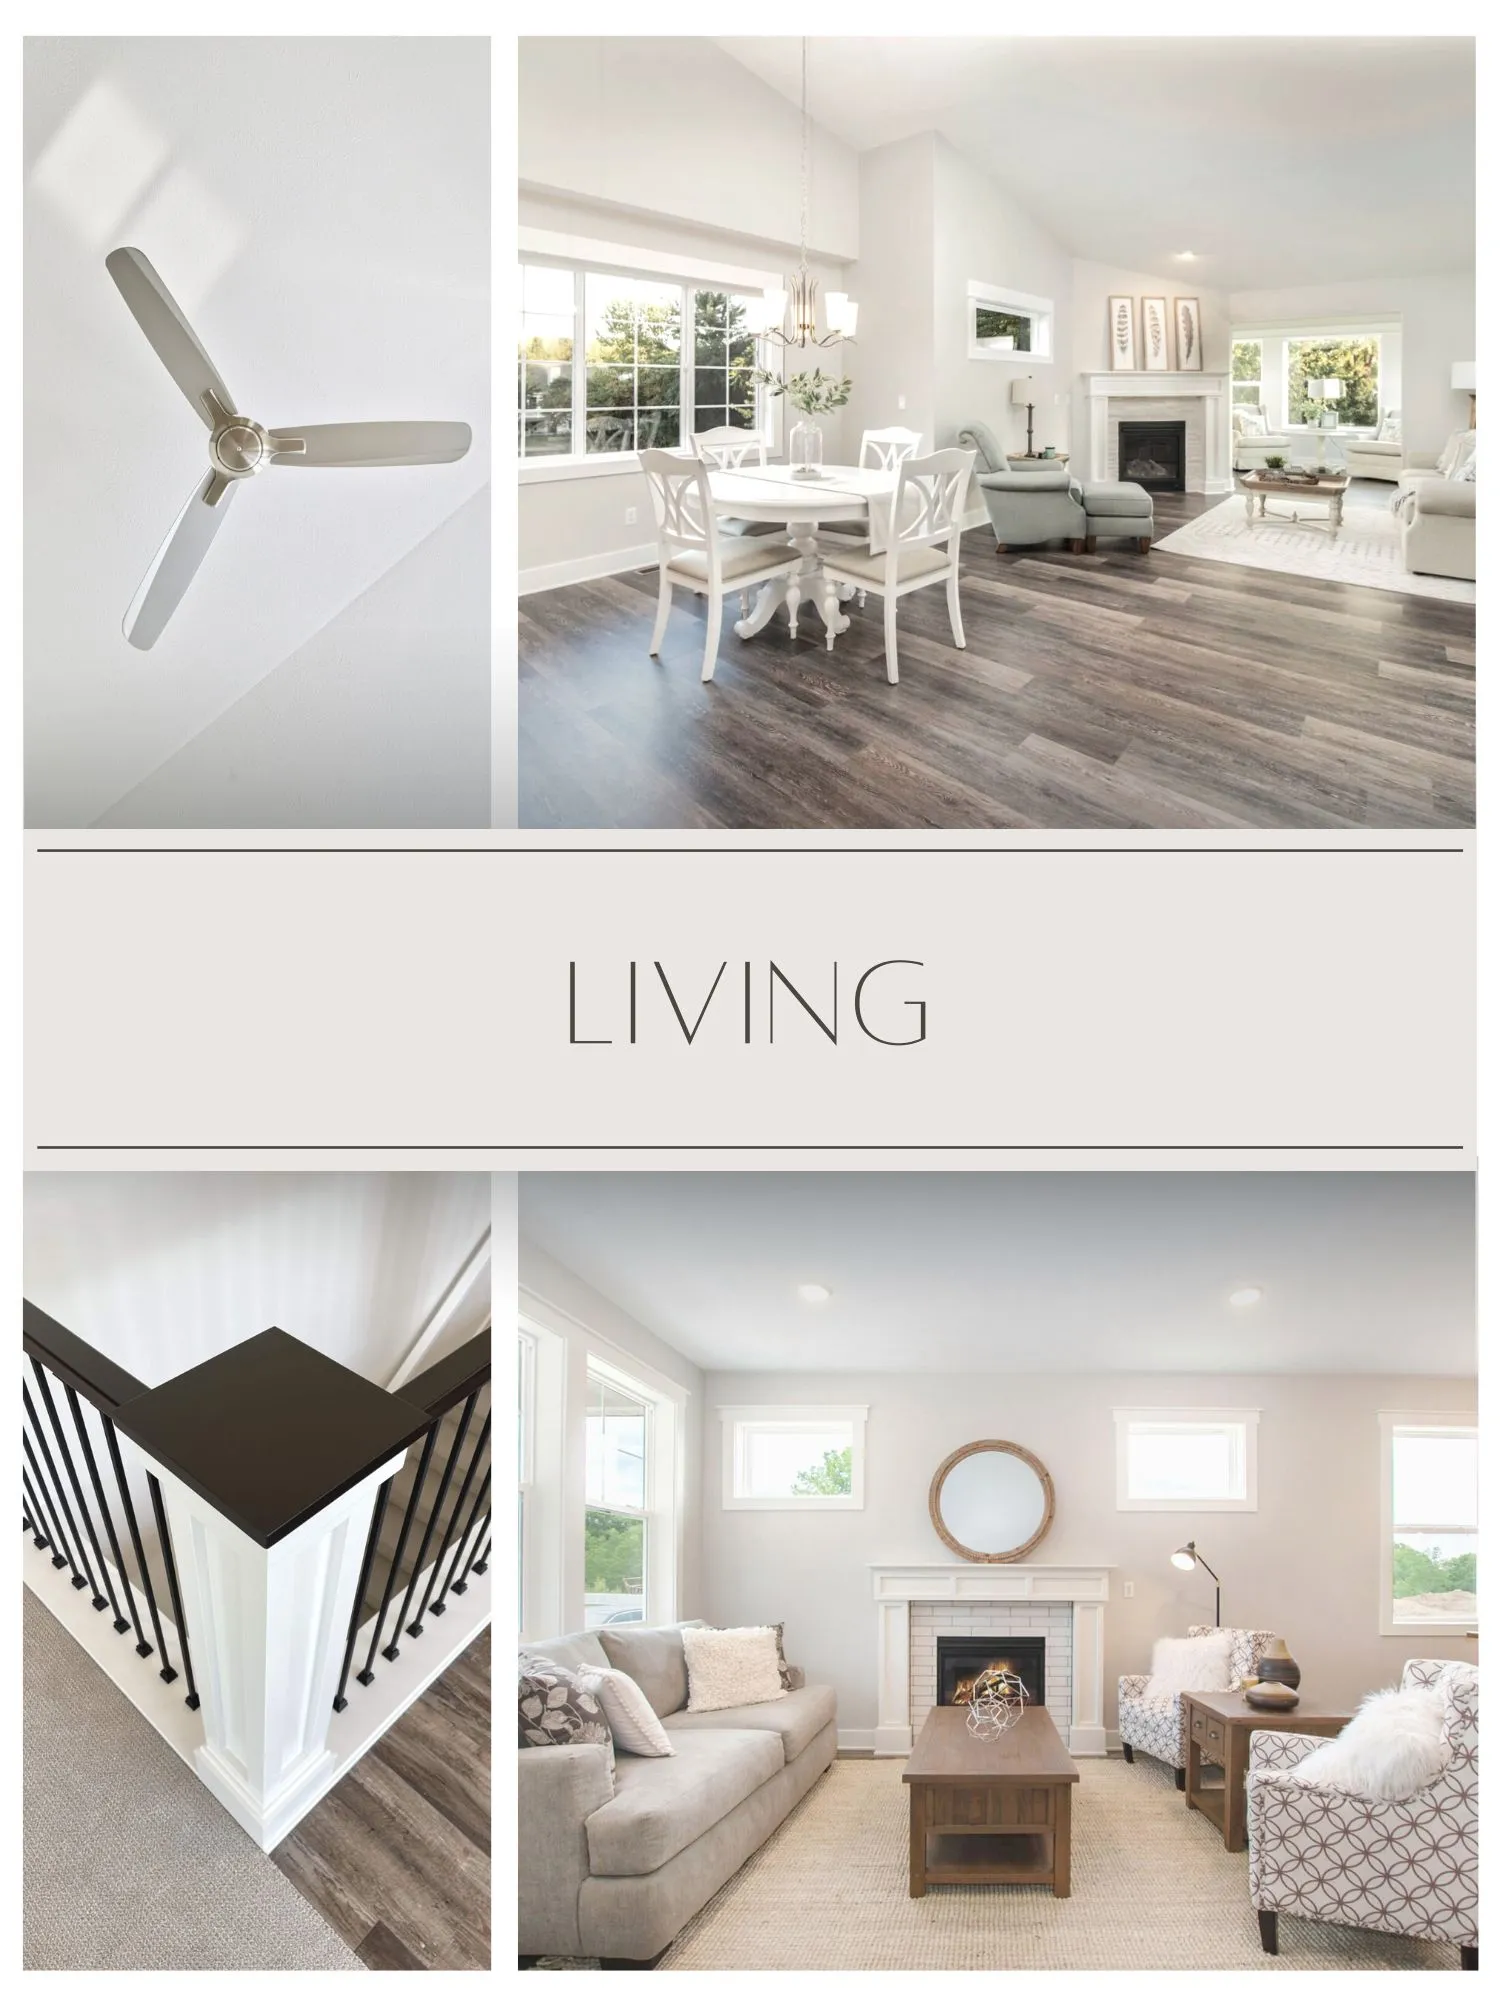 Livingroom Options | Fireplaces | Flooring | Fans and Lighting